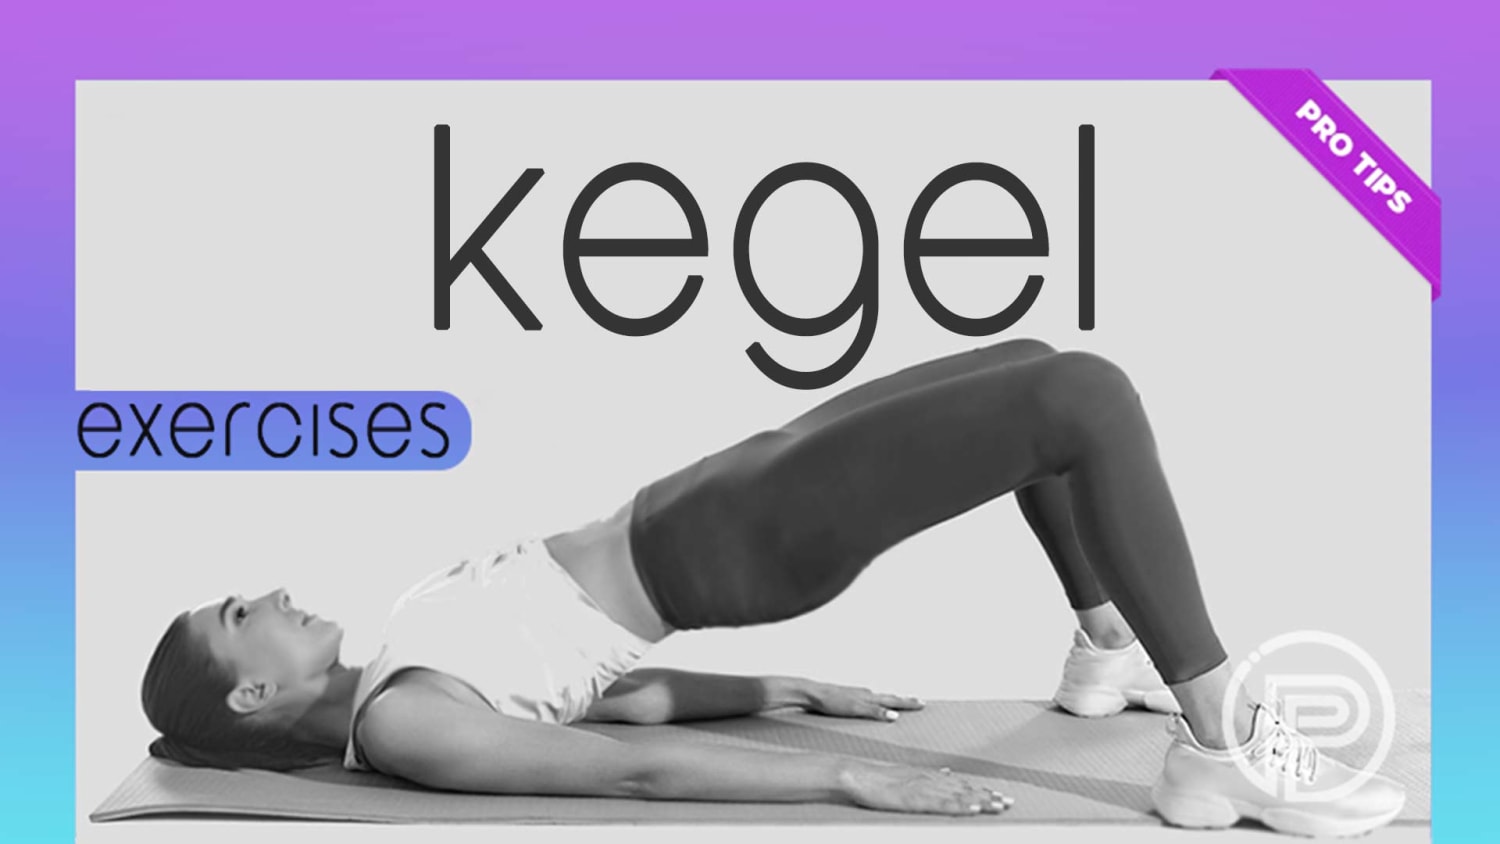 Discover Magic. How to Do Kegel Exercises for Women. [Step by Step]